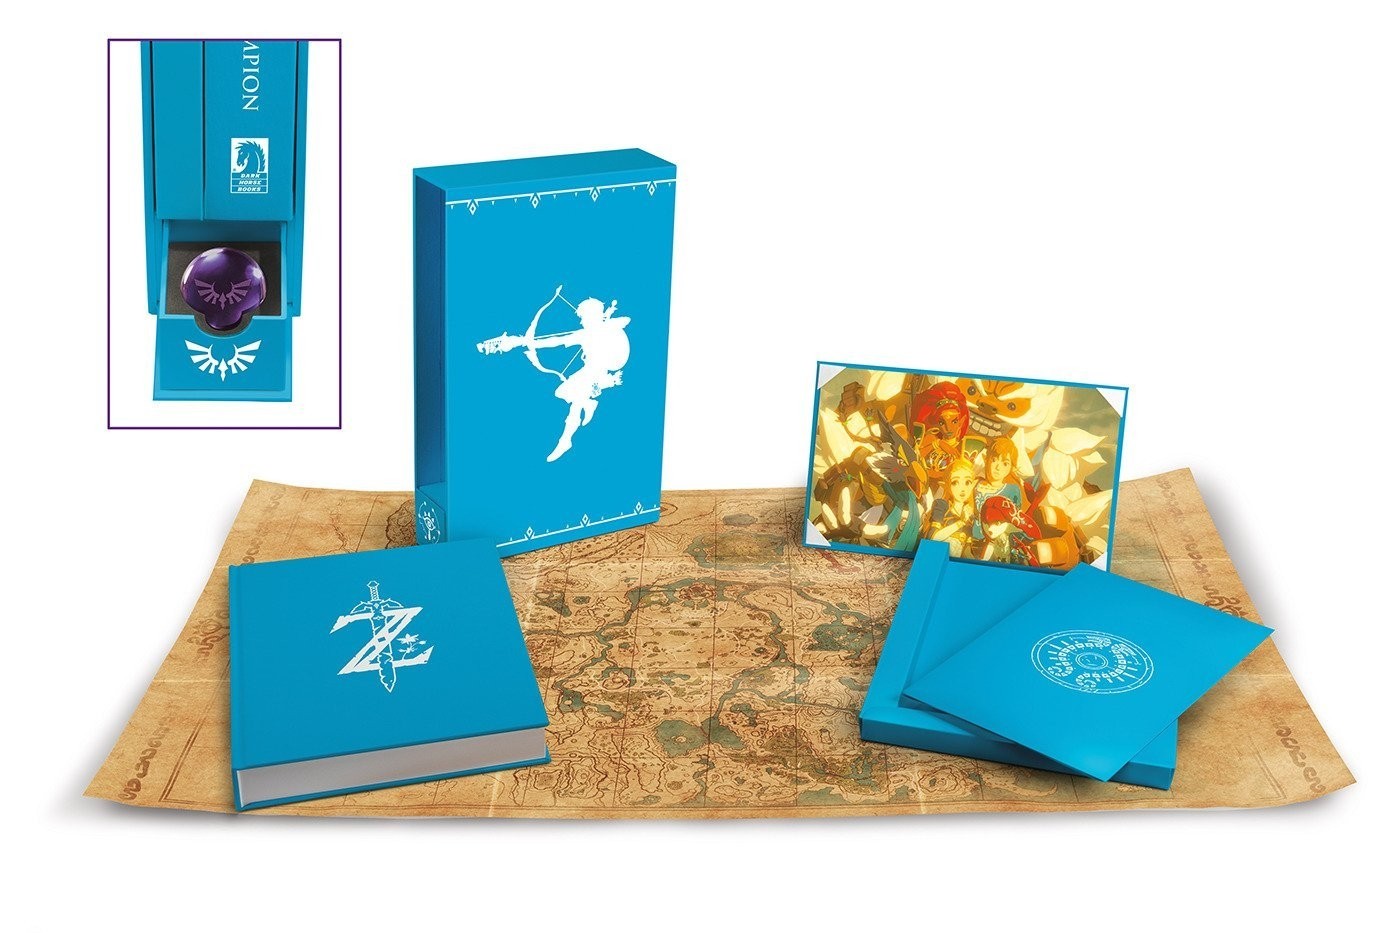 The Legend of Zelda: Breath of the Wild Creating a Champion Limited Edition